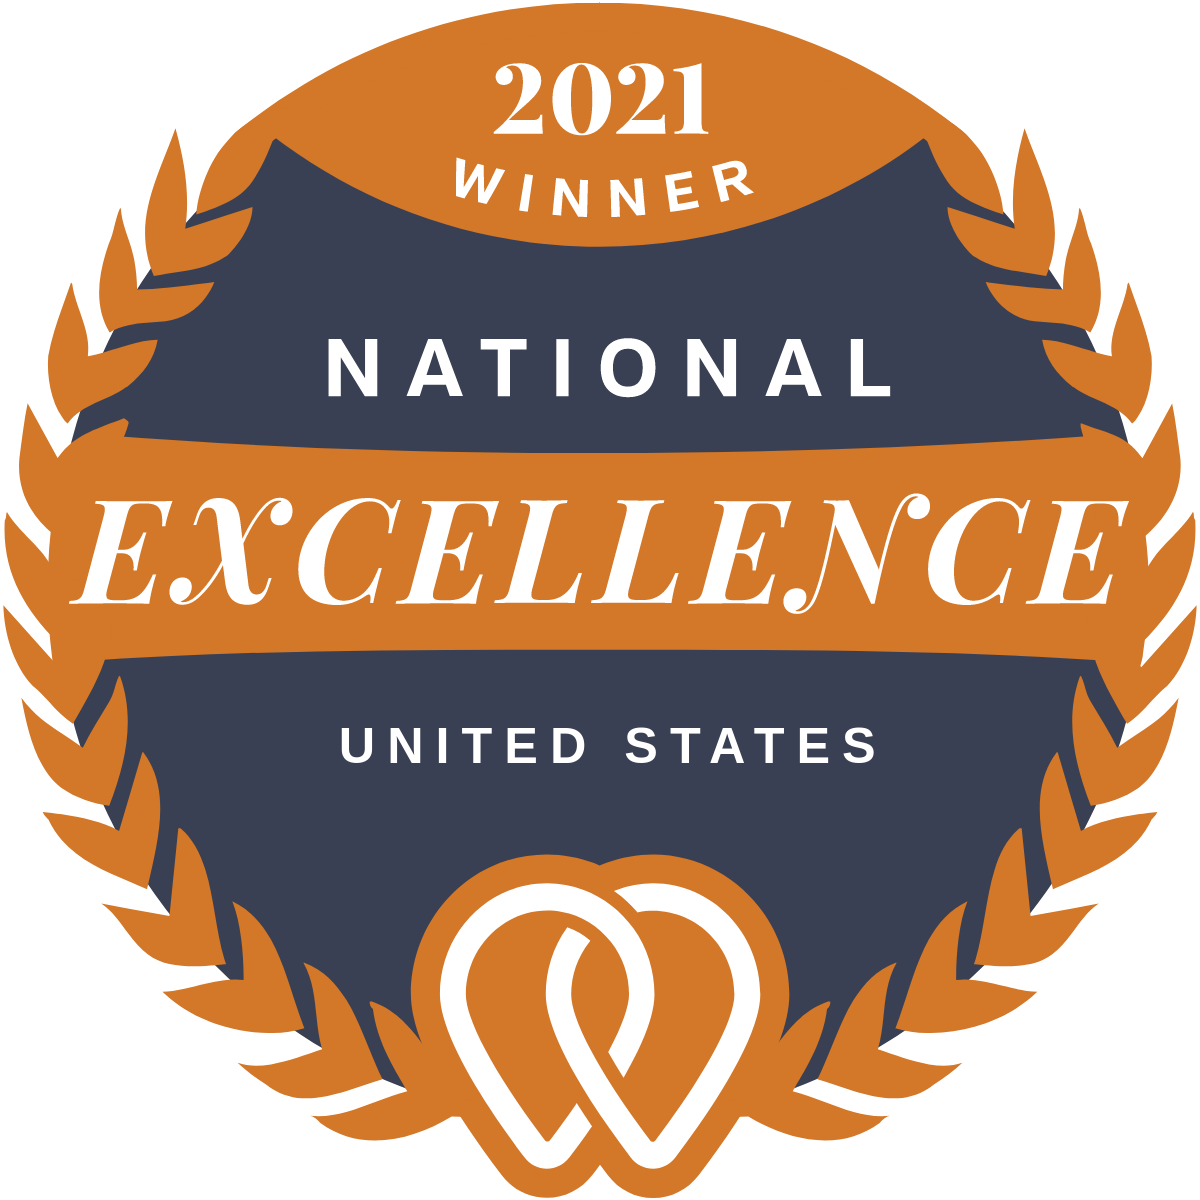 Thrive-National-Excellence-Awards-2021-in-United-States.png